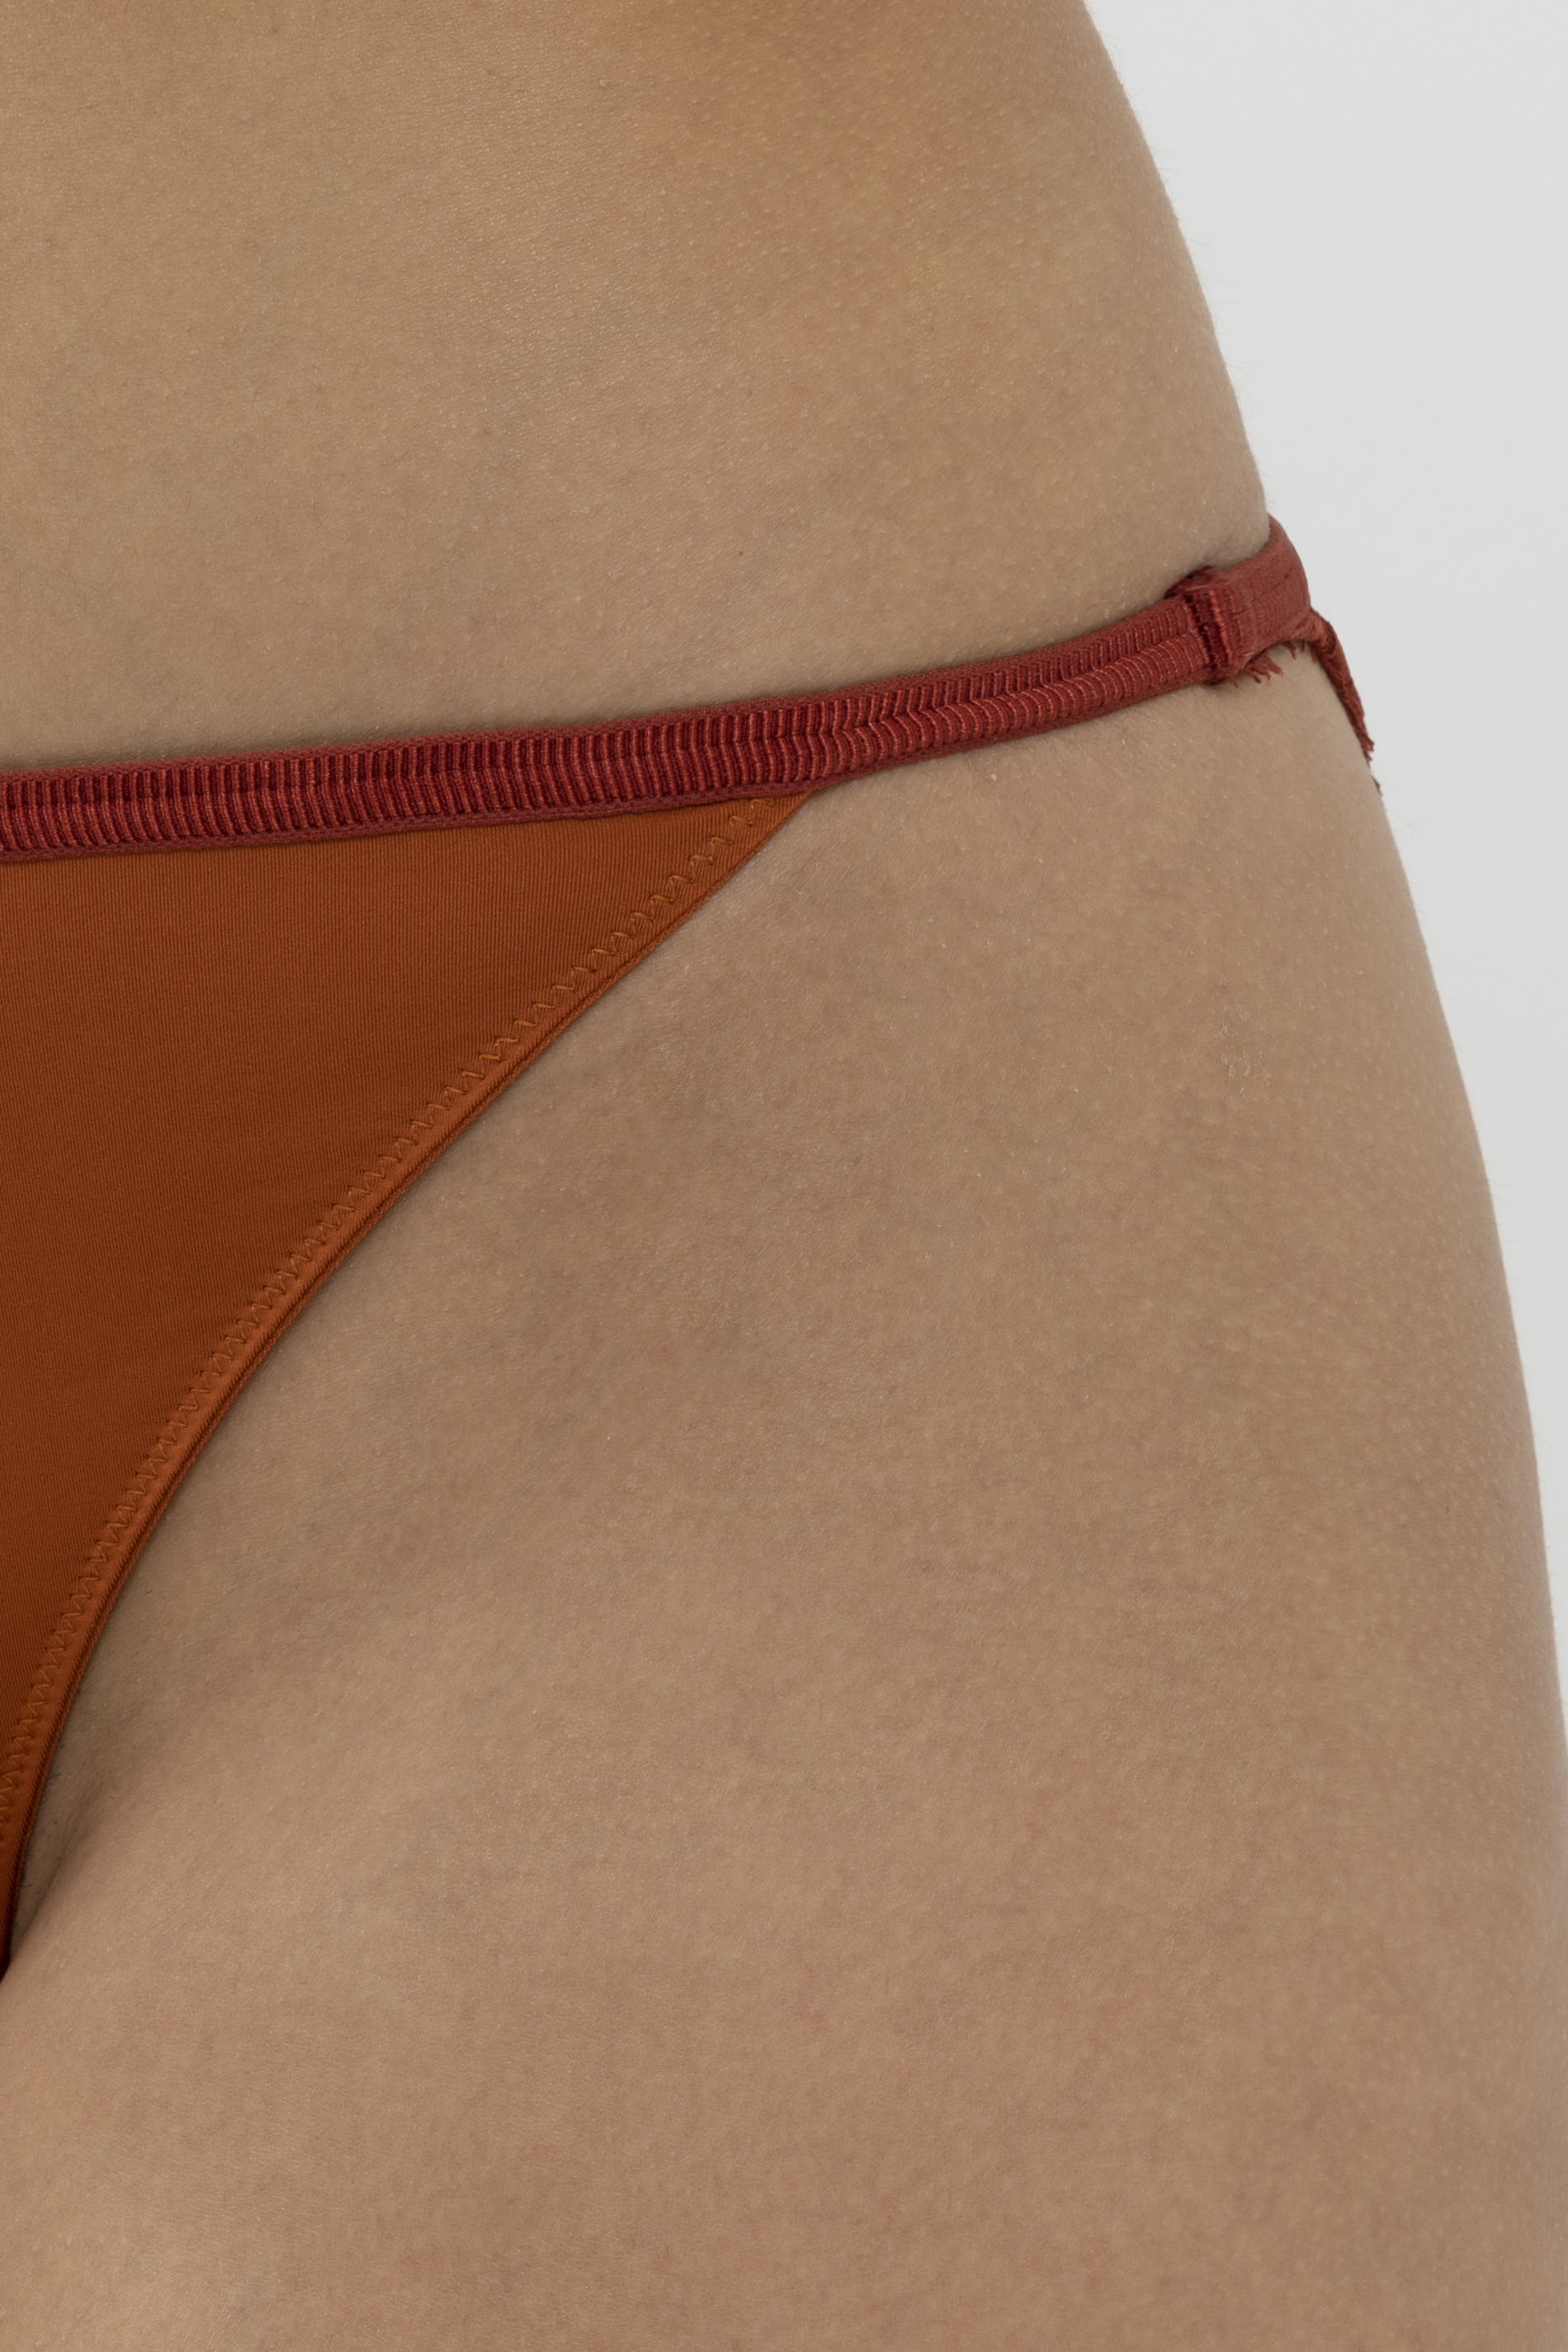 Tanga Red Pepper Serie Poetry Vogue Detailansicht 01 | mey®